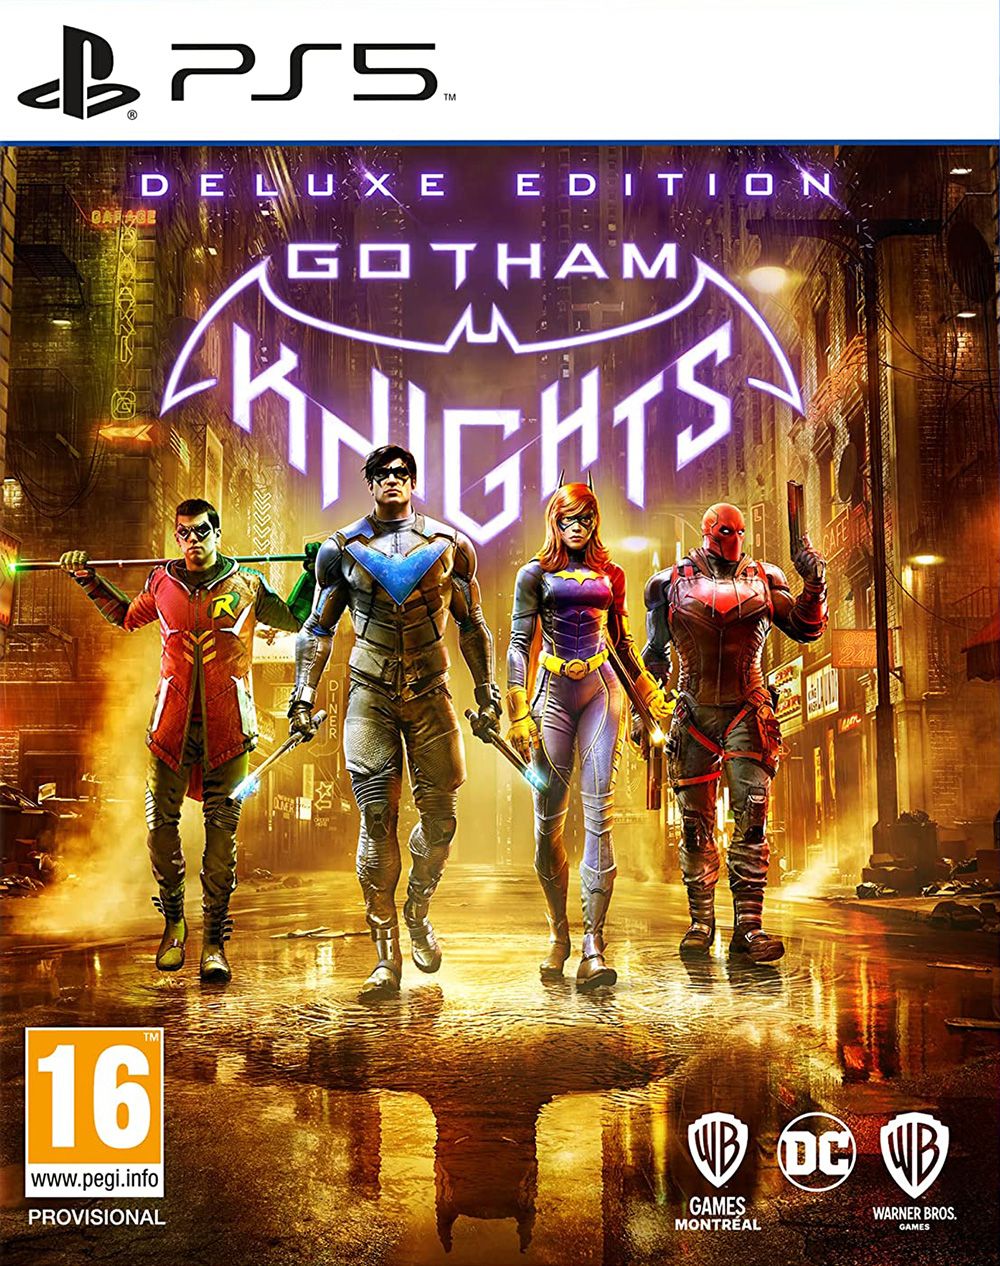 Gotham Knights Deluxe Edition (PS5)(New) Buy from Pwned Games with